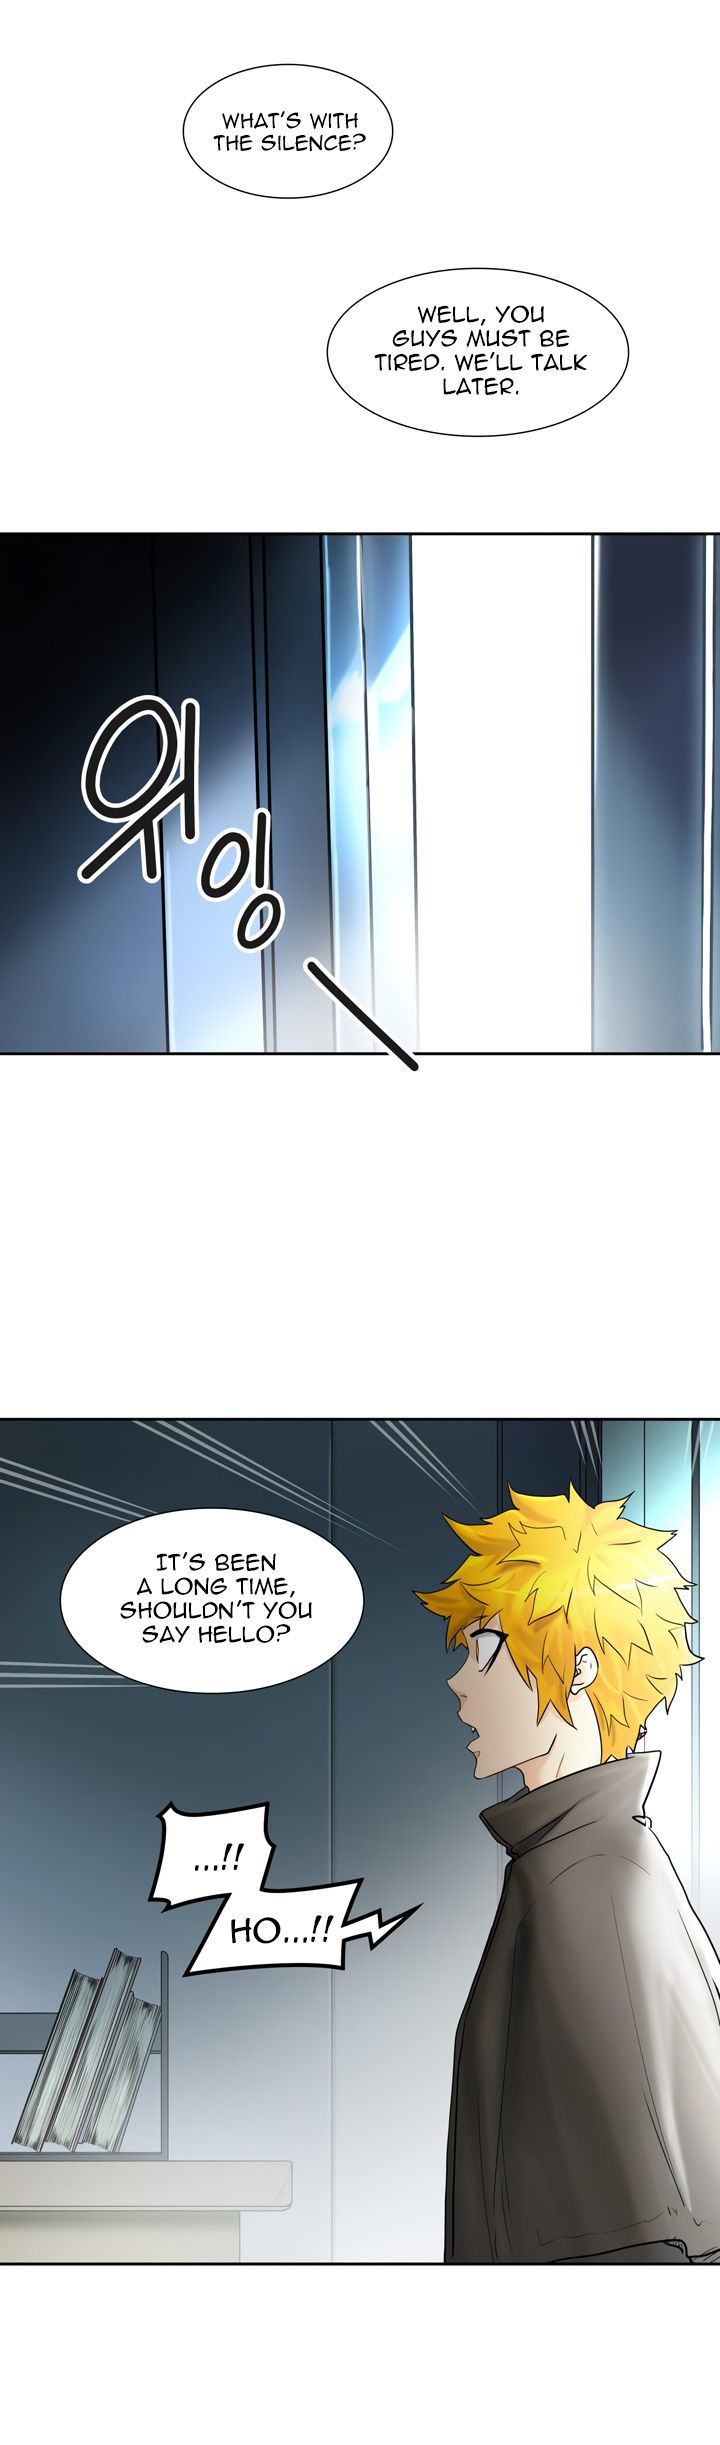 Tower of God 418